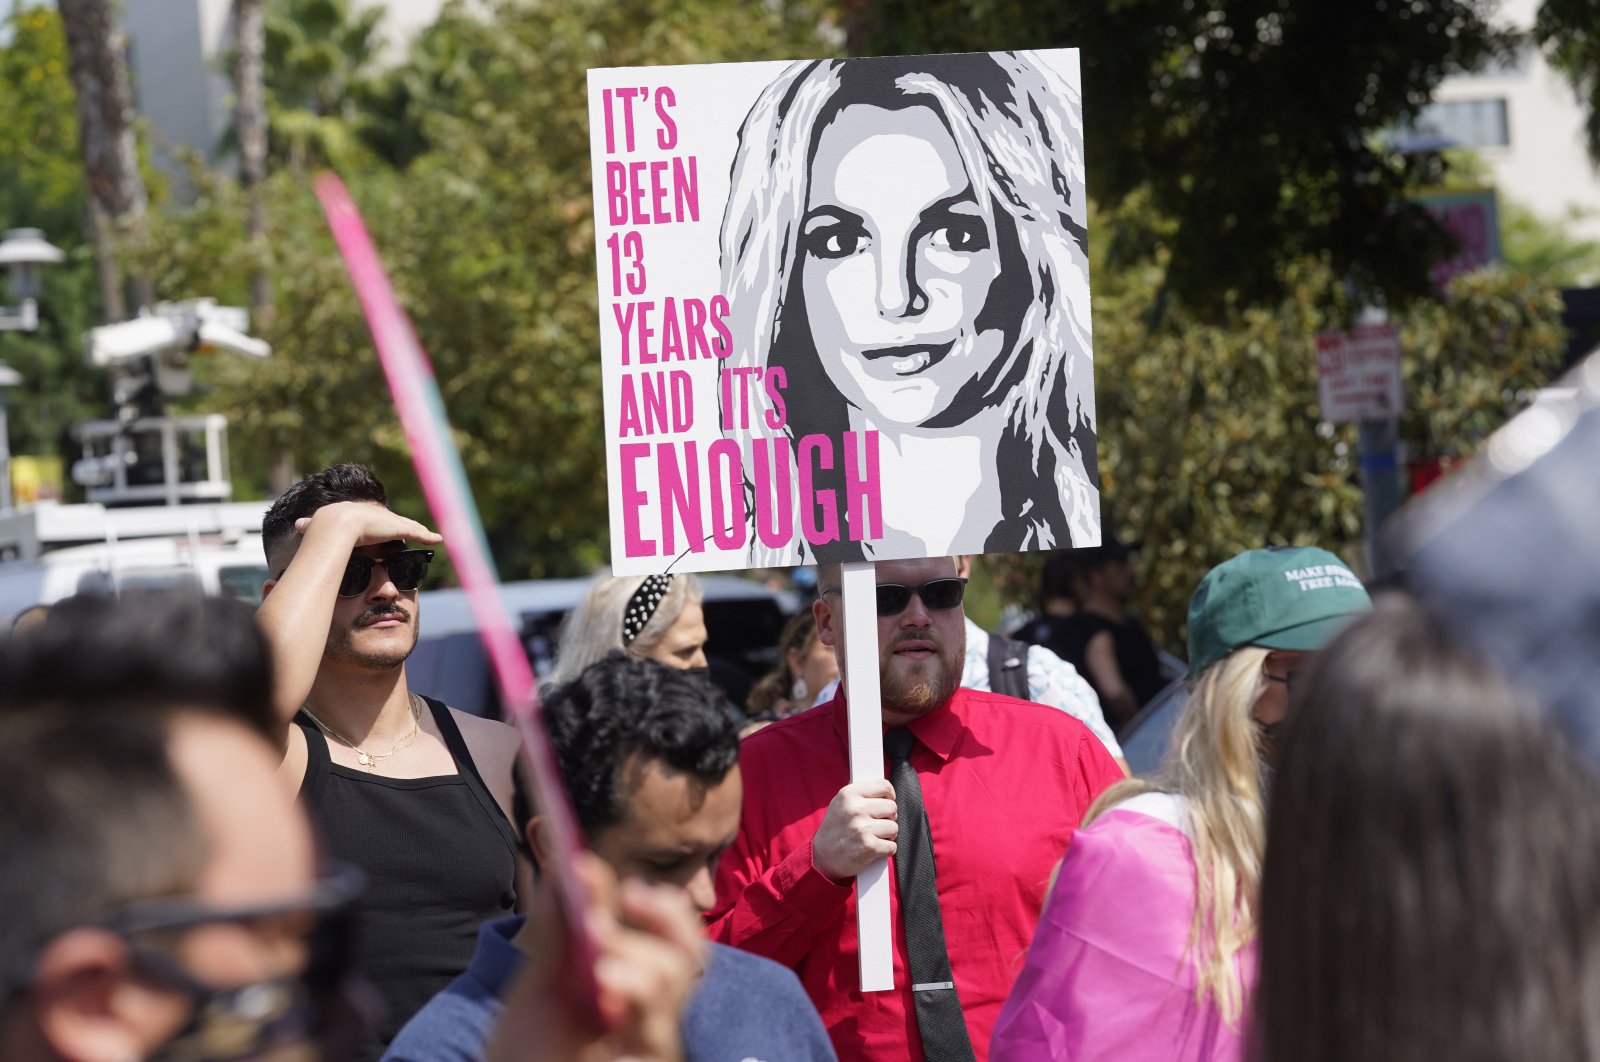 Britney Spears supporters demonstrate outside the Stanley Mosk Courthouse, Sept. 29, 2021, in Los Angeles. (AP Photo)